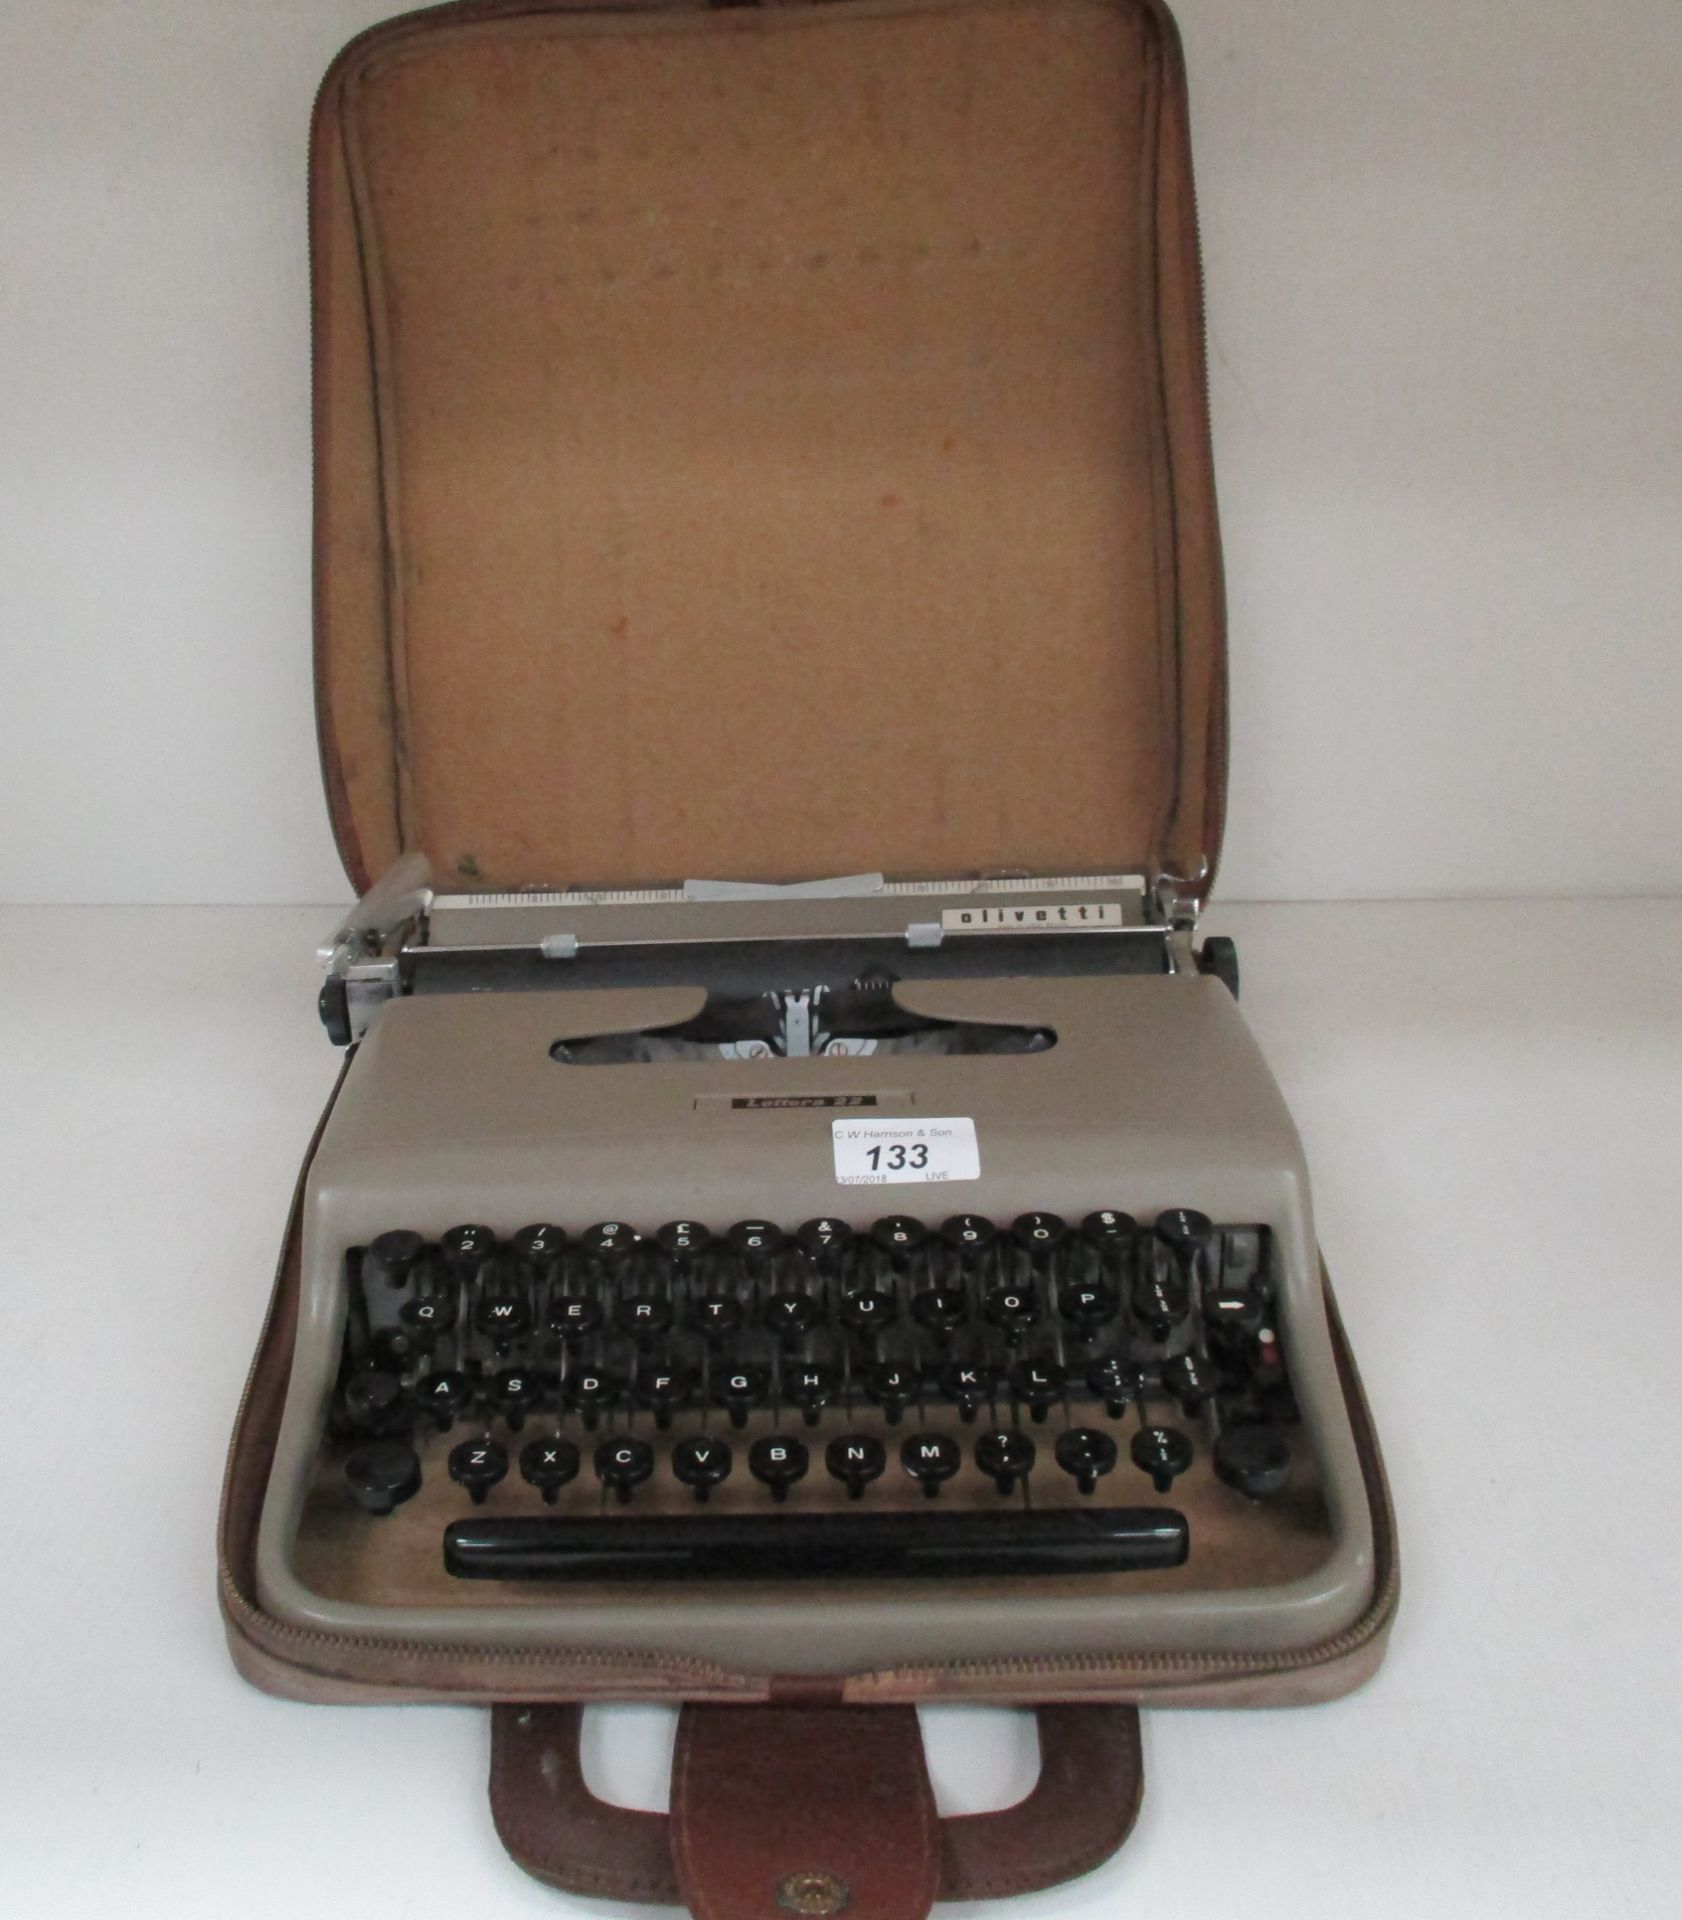 An Olivetti Lettera manual typewriter in a portable case